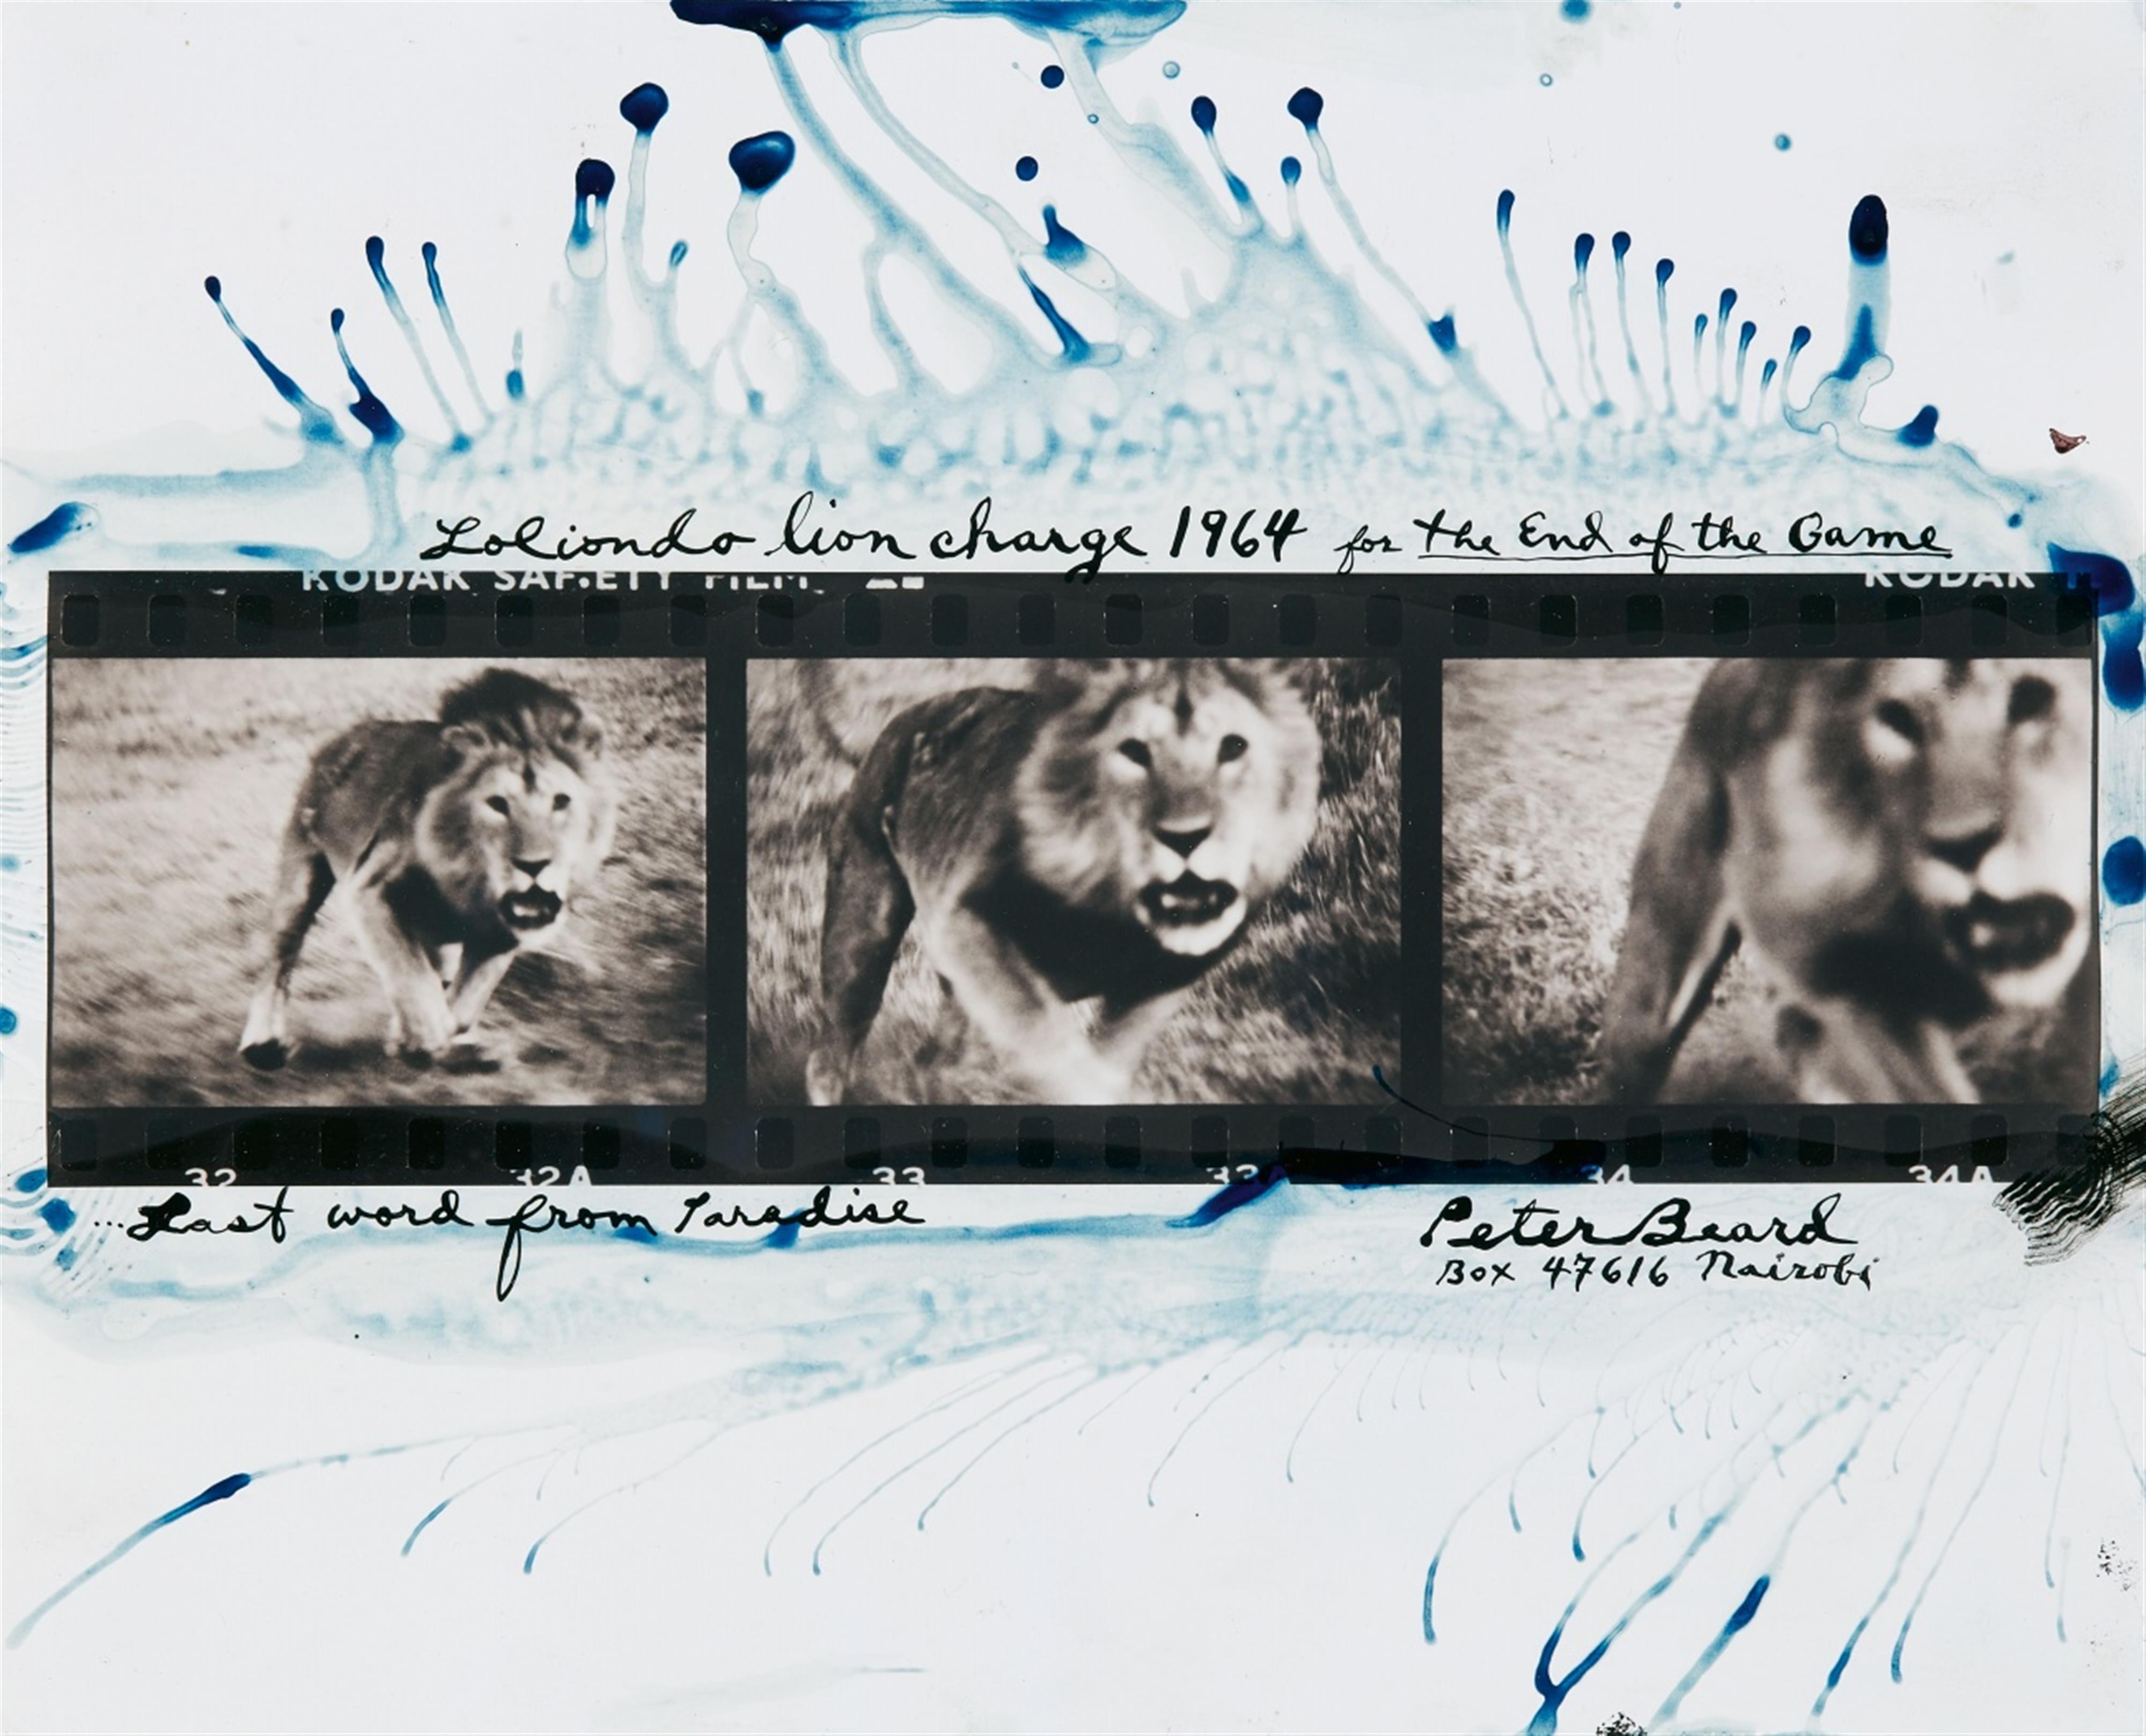 Peter Beard - Loliondo Lion Charge (from the series: The End of the Game)